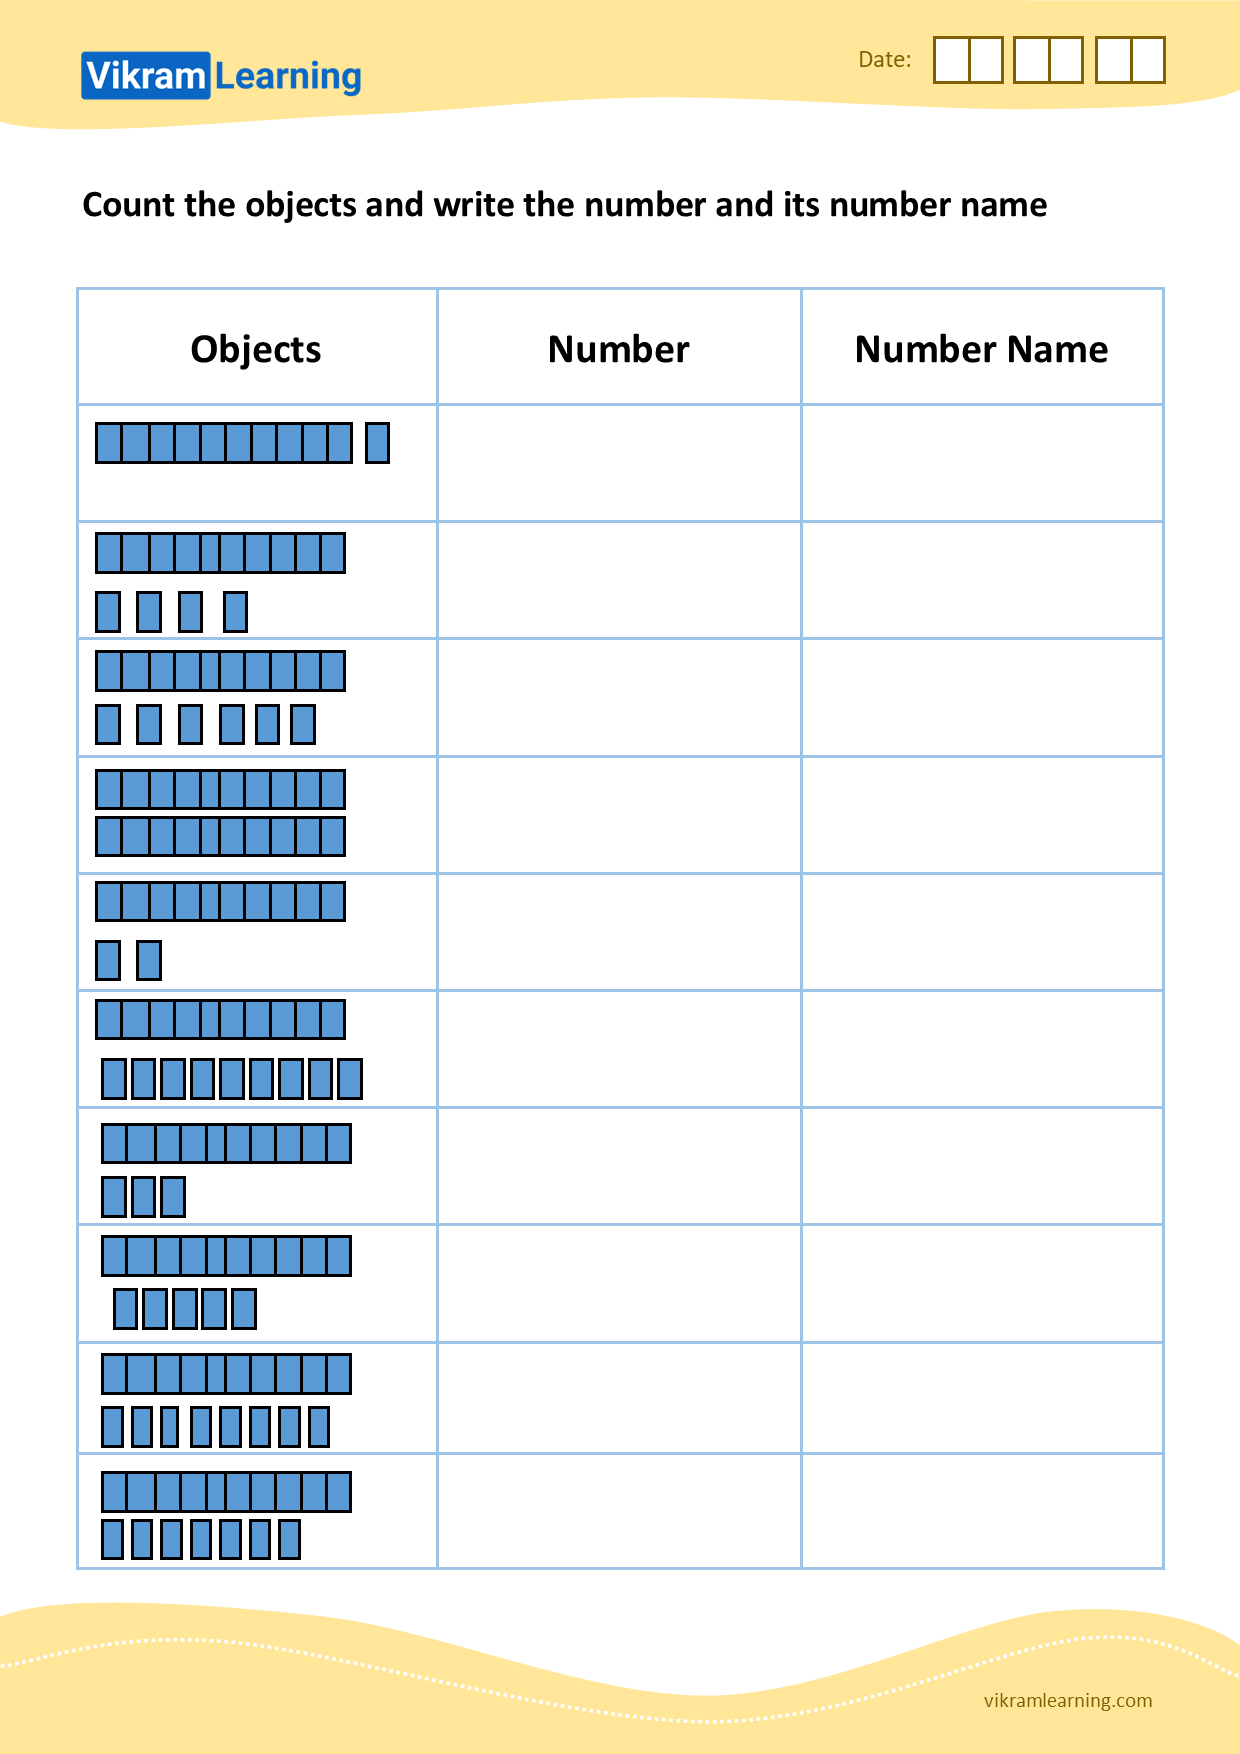 download-count-the-objects-and-write-the-number-and-its-number-name-11